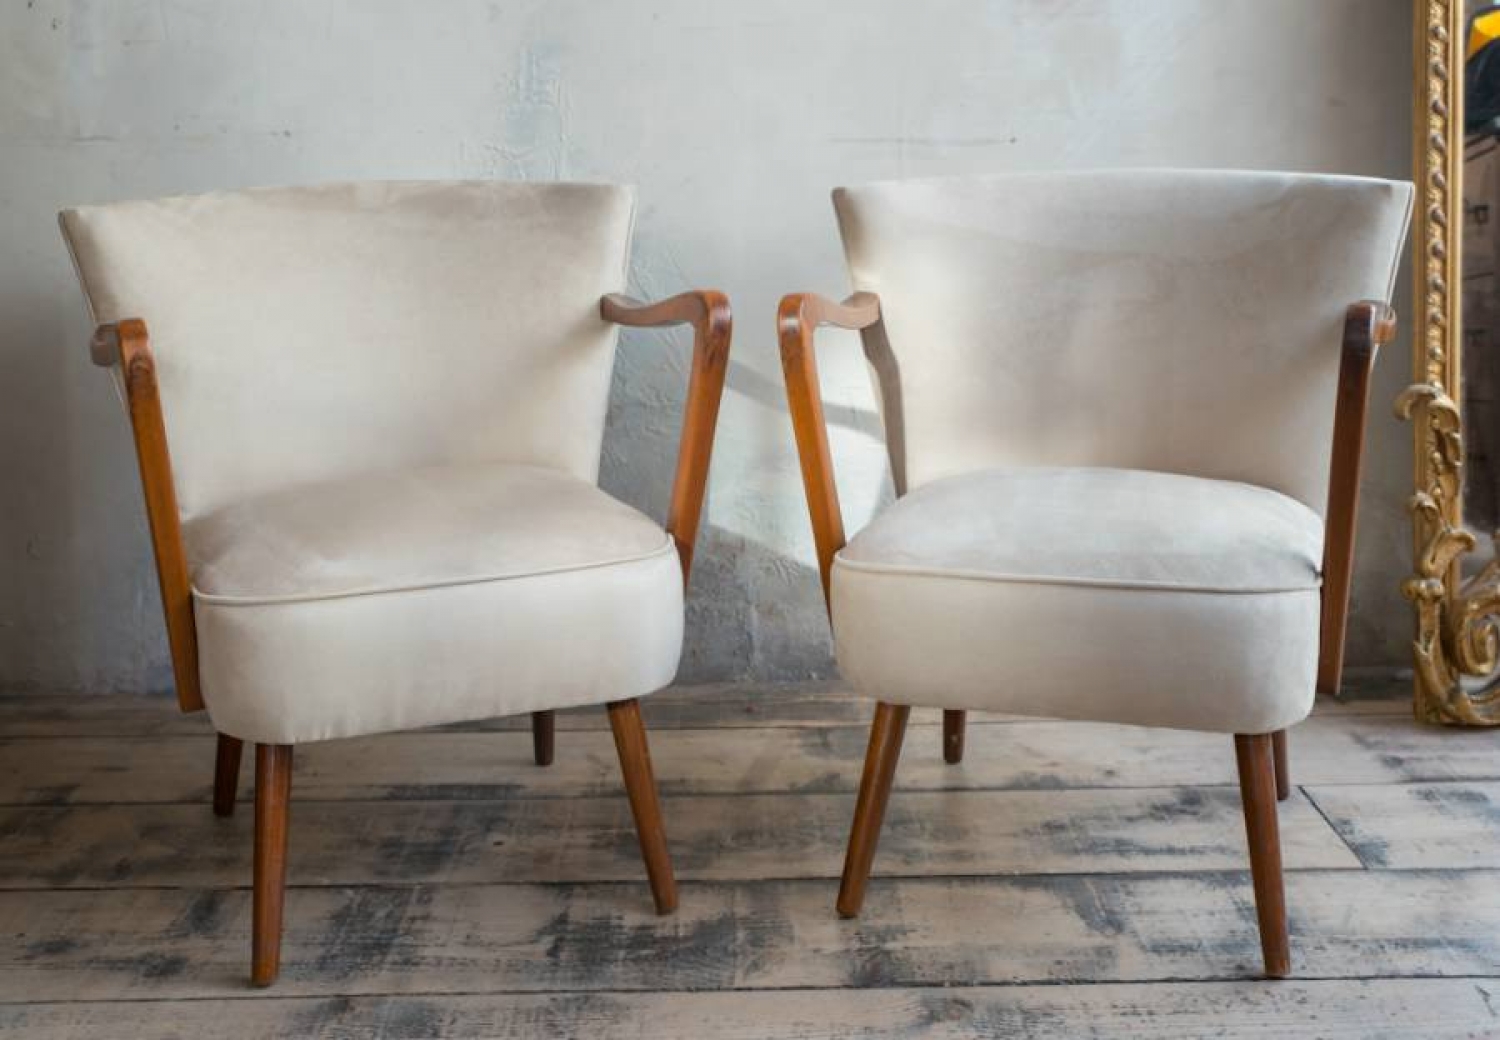 Pair of  German Mid century chairs reupholstered in faux suede chairs 